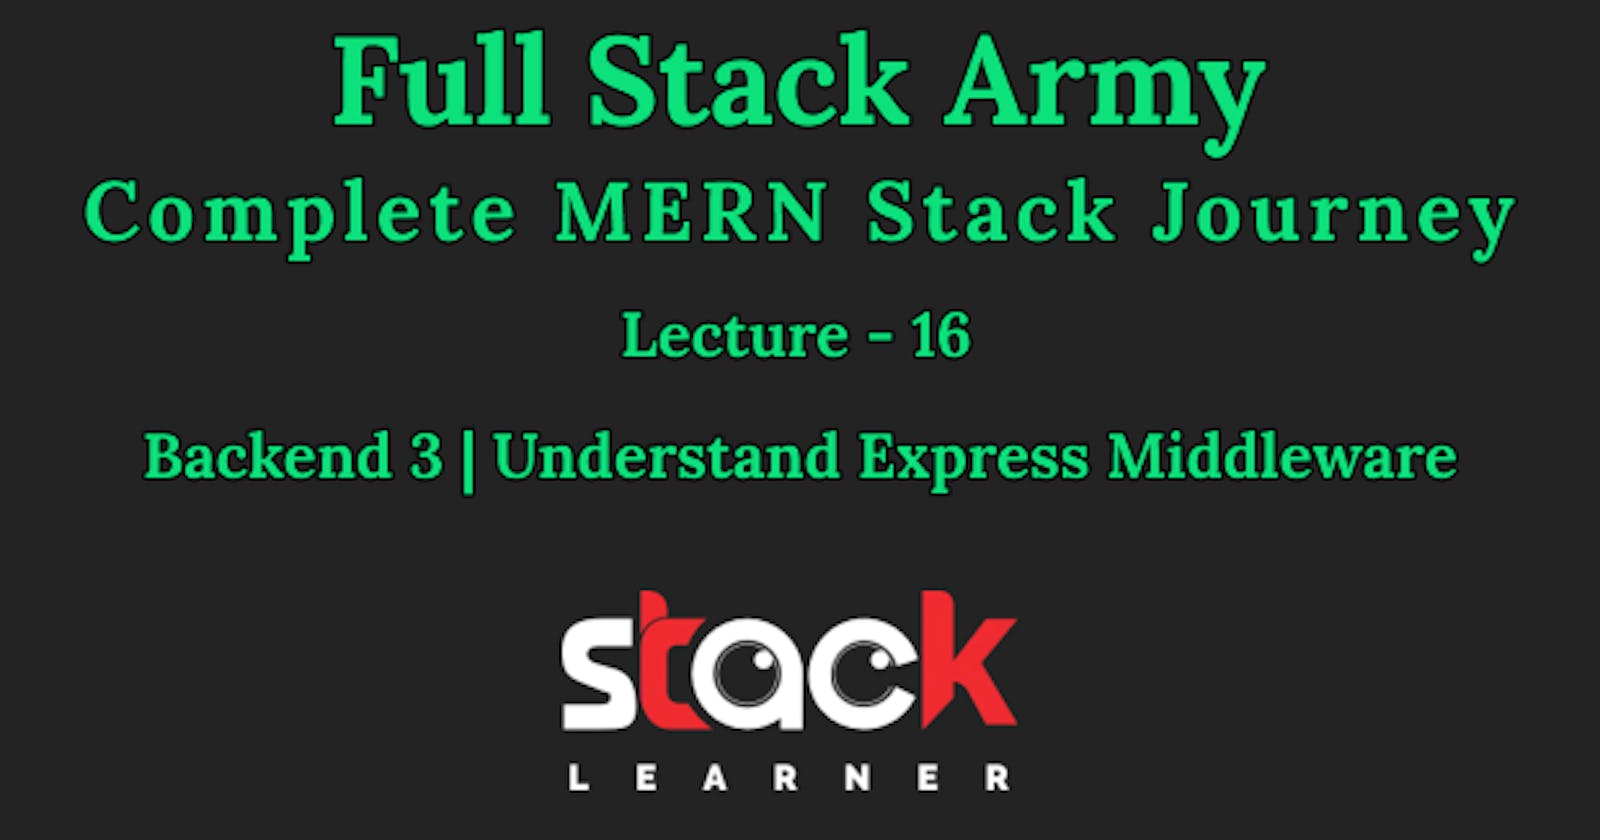 Lecture 16 - [Backend 3] Understand Express Middleware